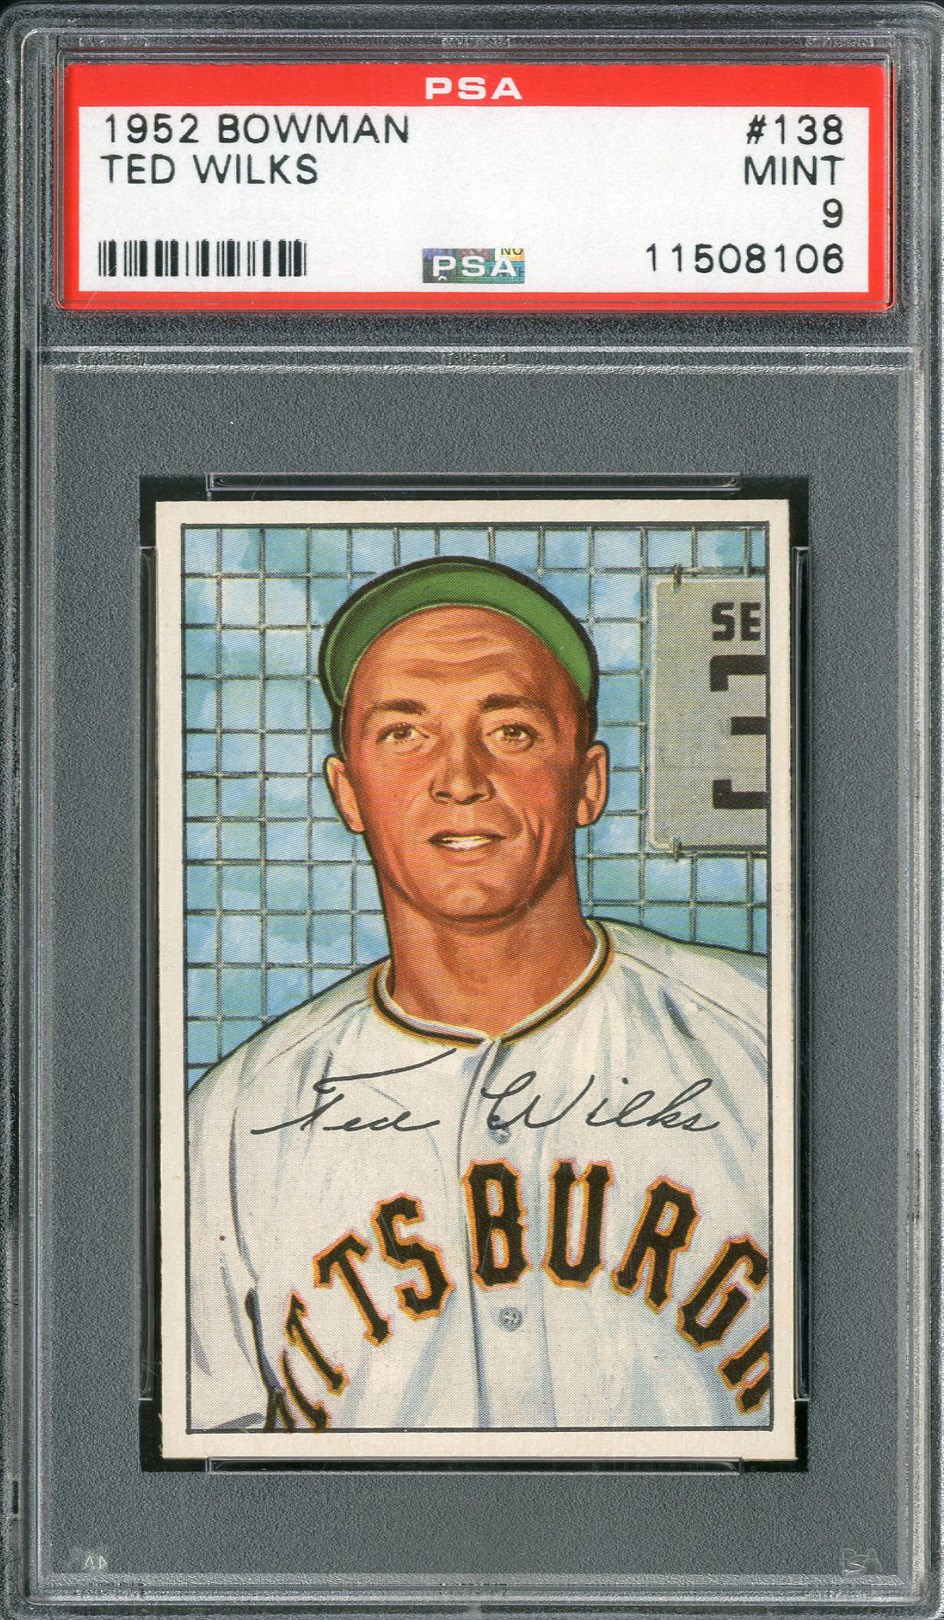 Baseball and Trading Cards - 1952 Bowman #138 Ted Wilks PSA MINT 9